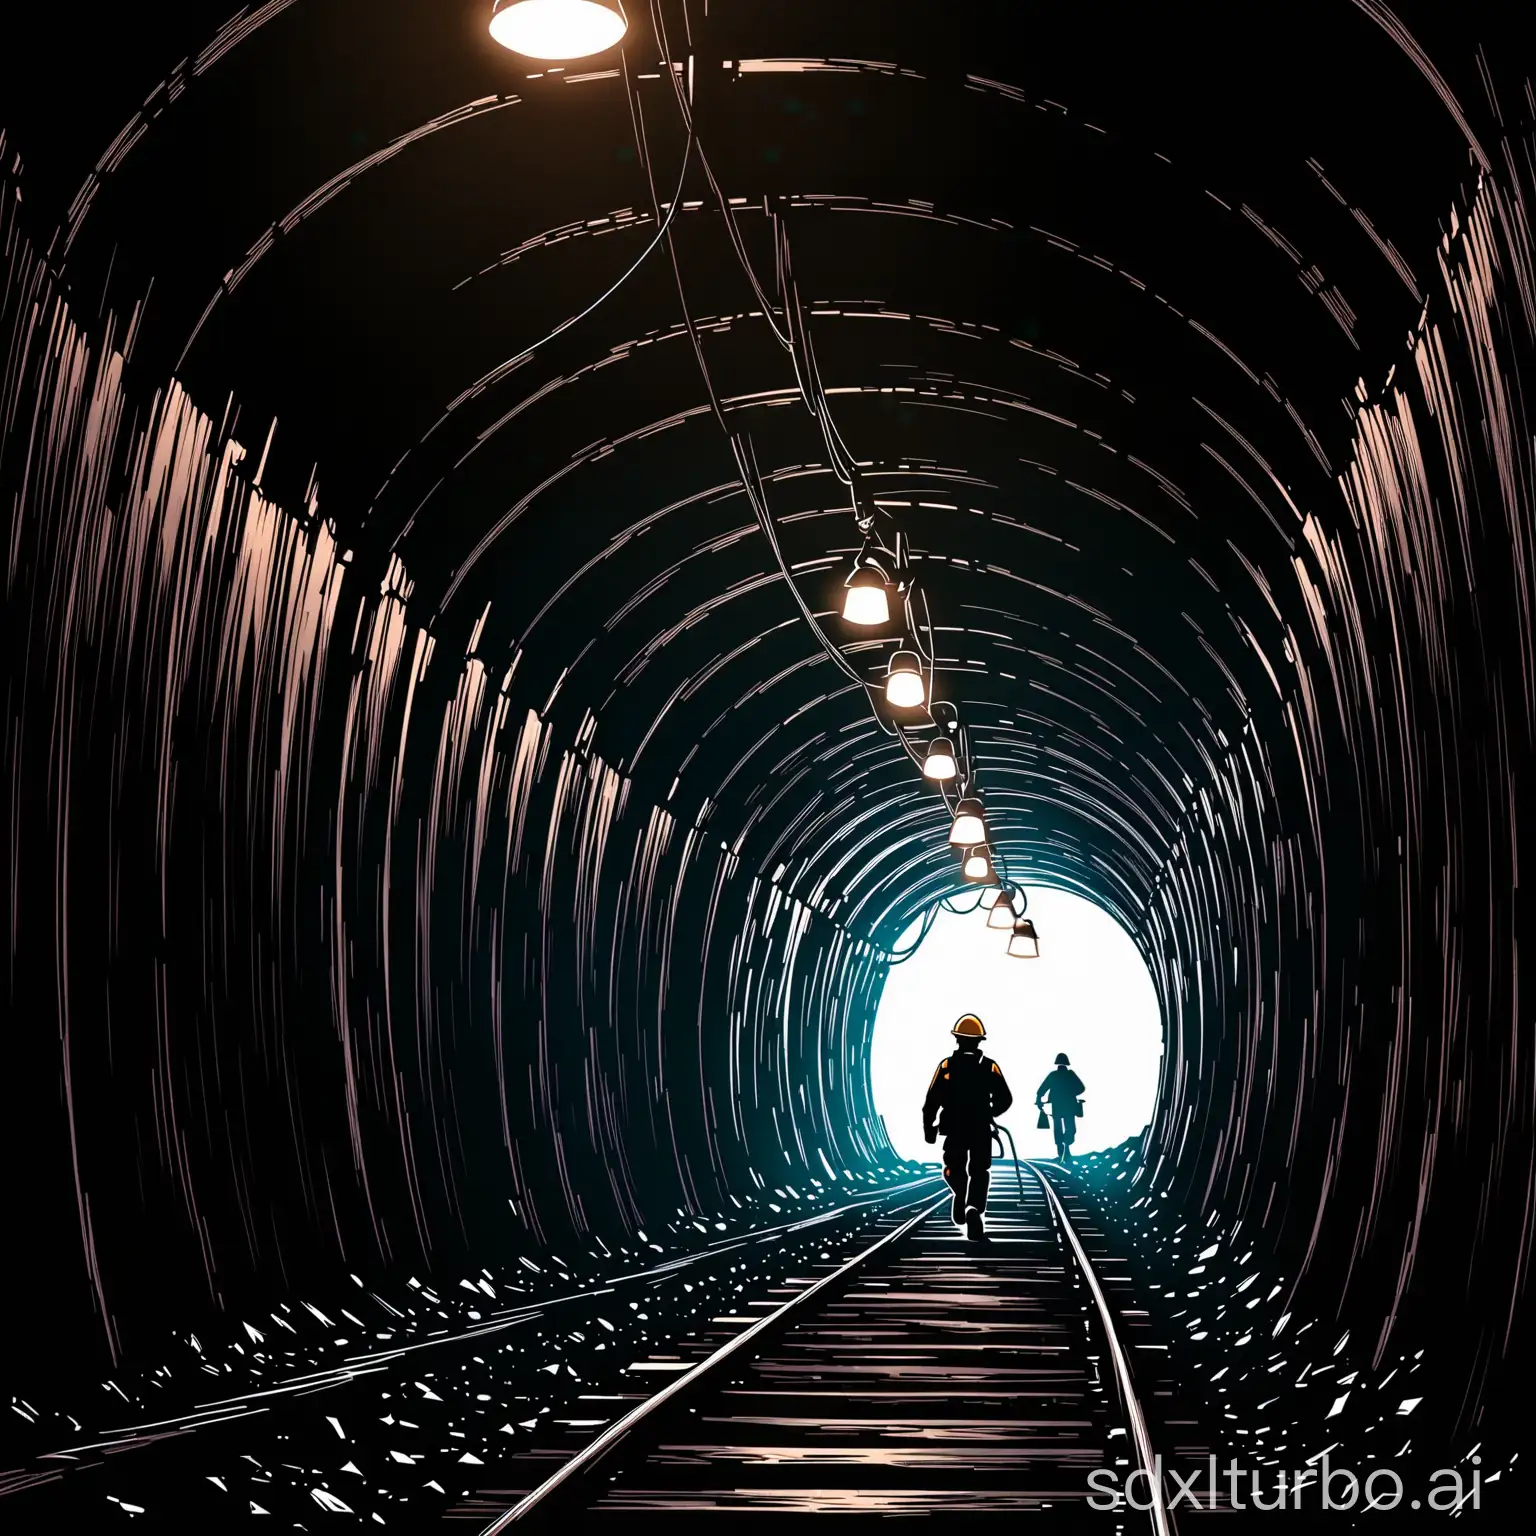 Industrial-Safety-Tunnel-Miner-Exiting-Amid-Manuals-and-Equipment